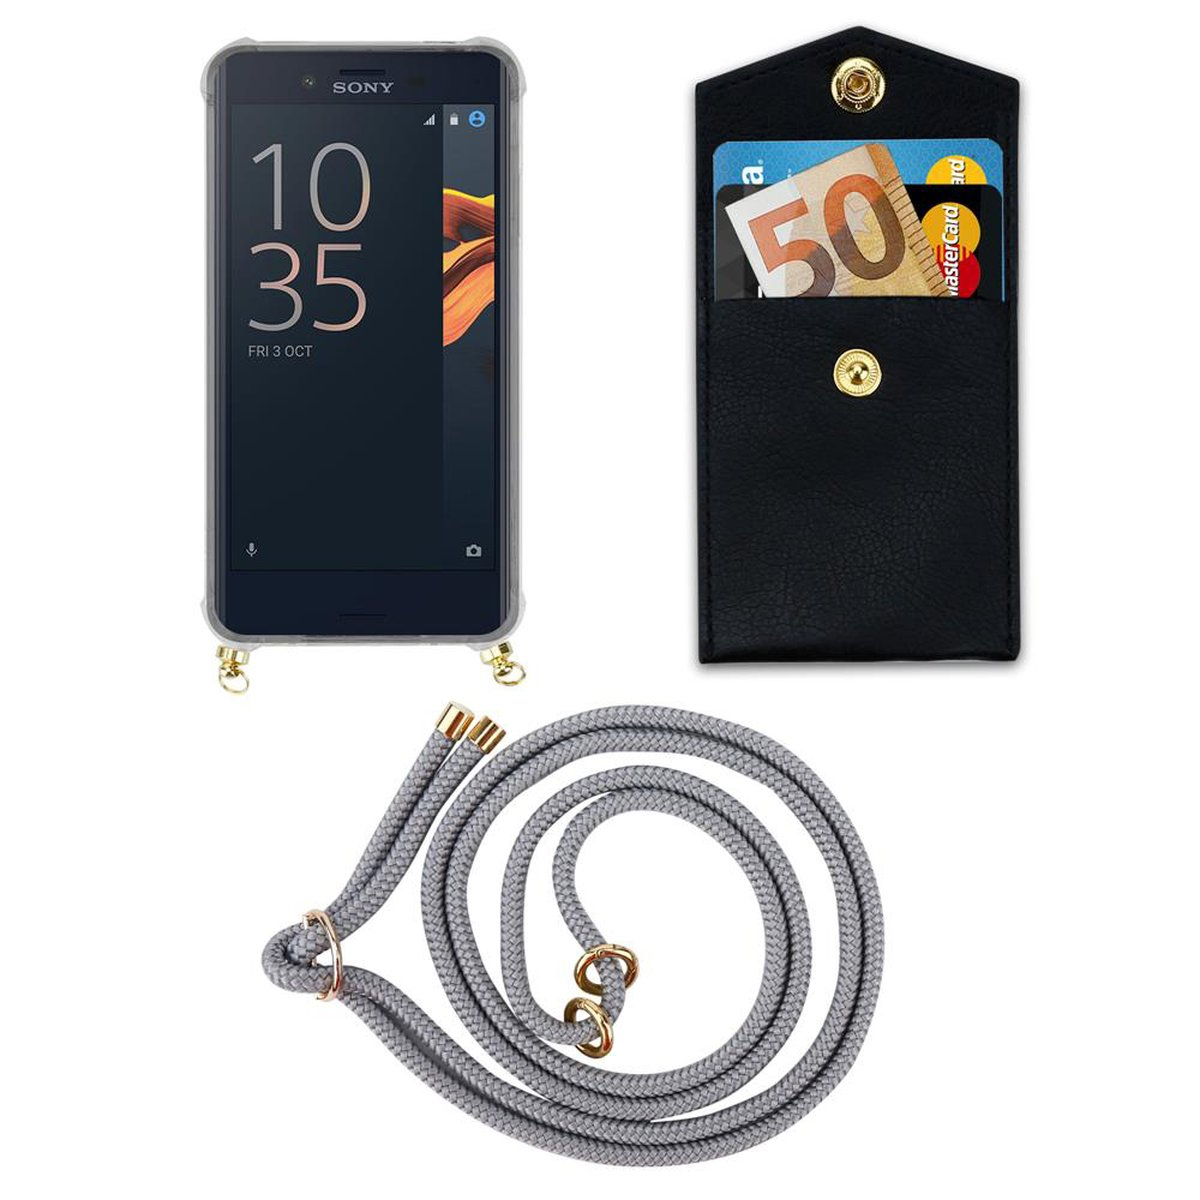 SILBER Sony, Xperia Backcover, Kette Ringen, COMPACT, Handy abnehmbarer Gold X Band CADORABO GRAU Hülle, und mit Kordel